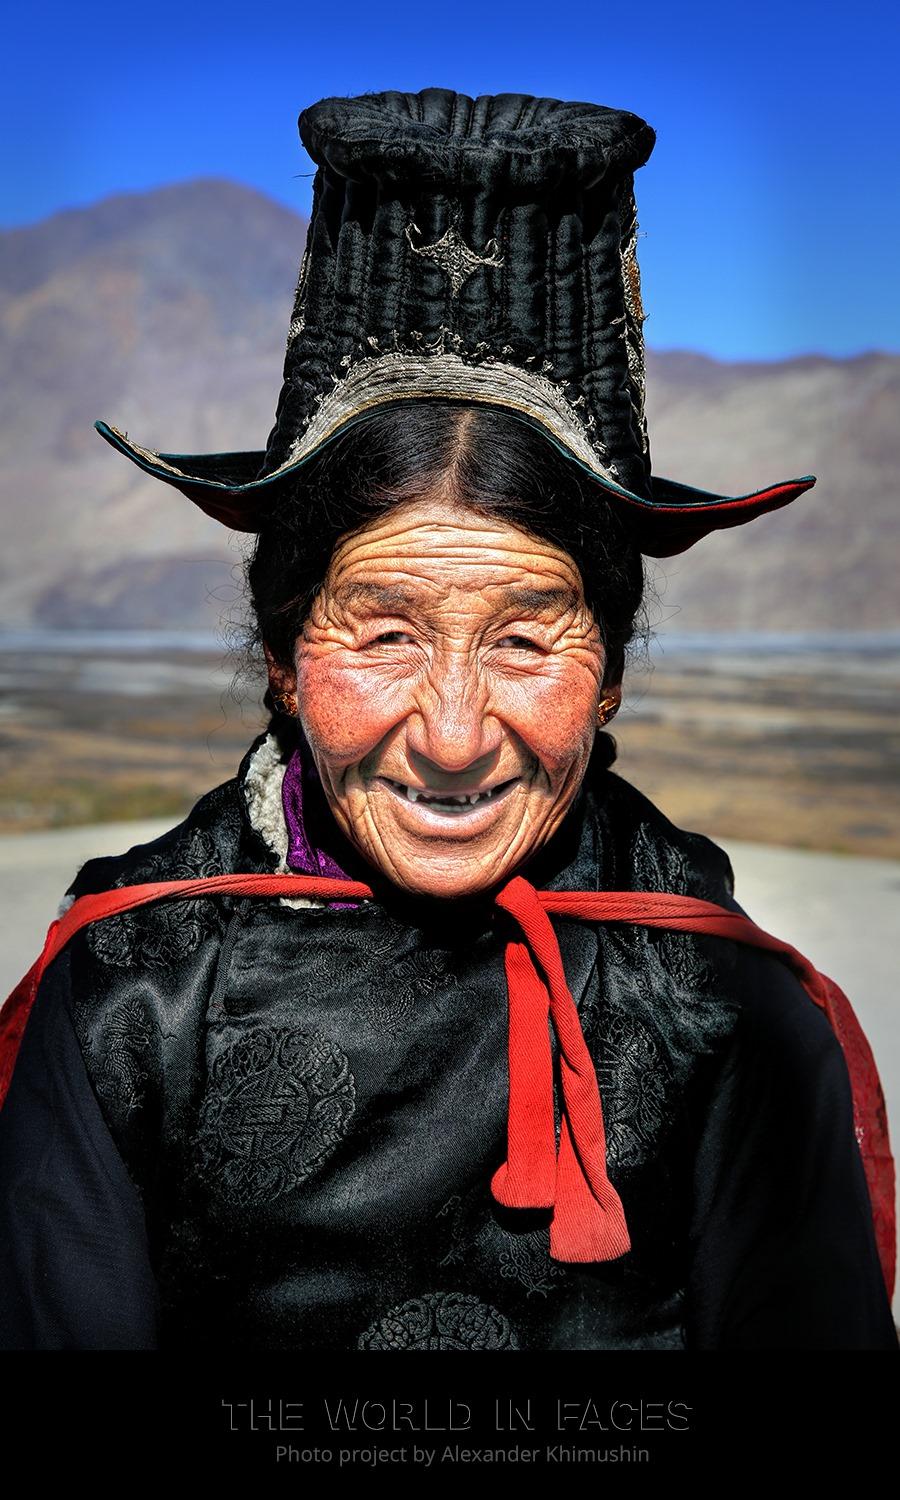 A Ladakhi woman from remote Nubra Valley of Ladakh Kingdom (© <a href="https://www.facebook.com/xperimenter">Alexander Khimushin</a> / The World In Faces)